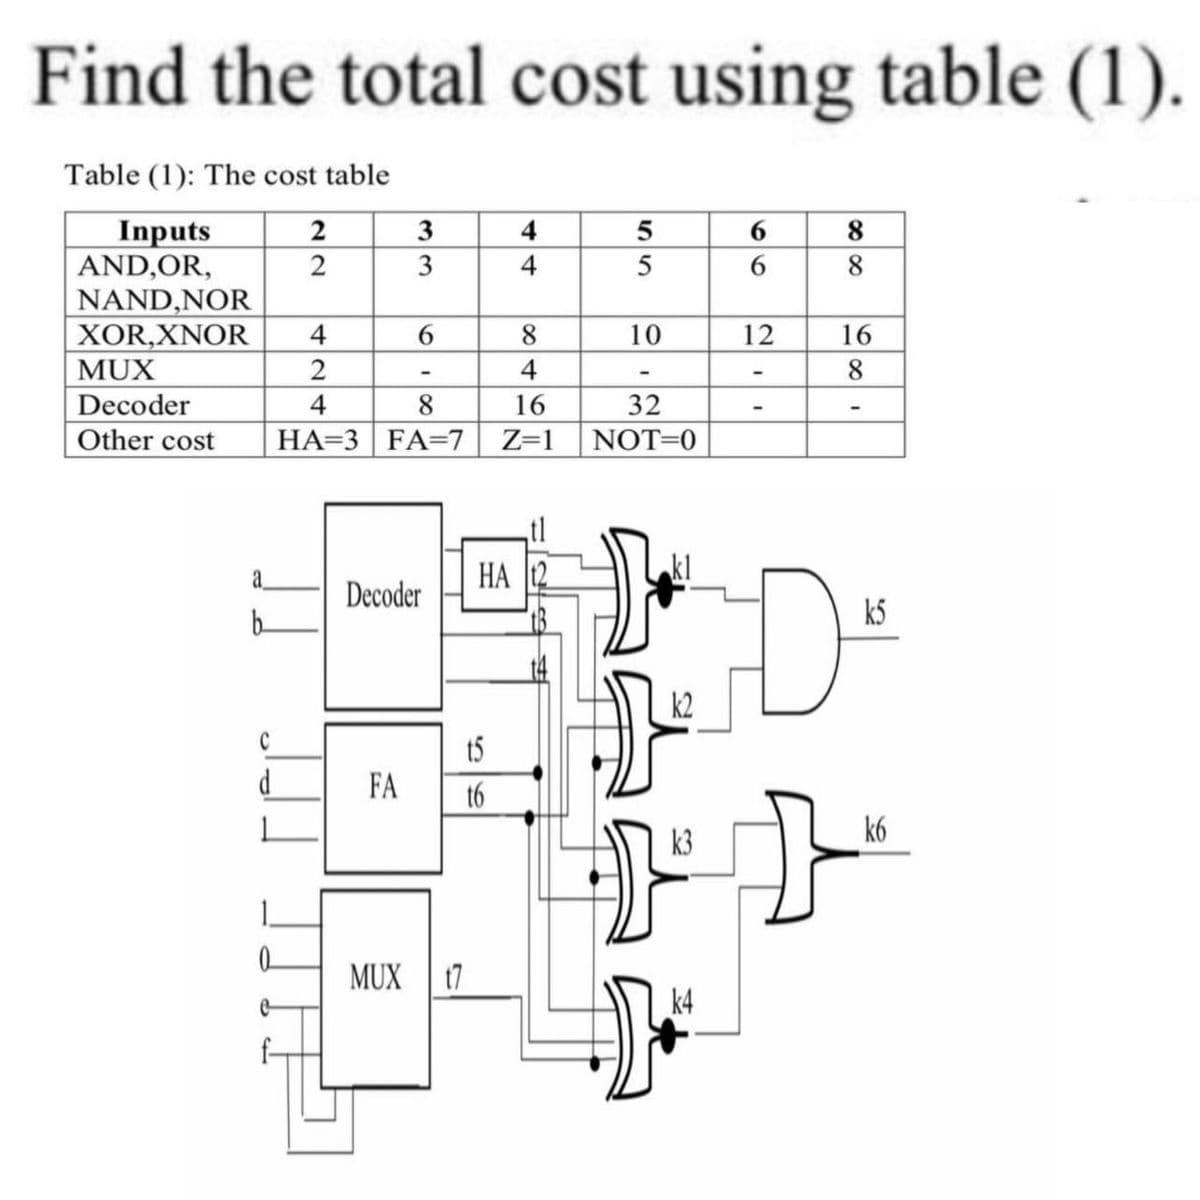 Find the total cost using table (1).
Table (1): The cost table
Inputs
44
33
4
5
55
6
99
8
88
2
AND,OR,
2
NAND, NOR
XOR,XNOR
4
MUX
2
-
Decoder
Other cost
4
HA-3 FA=7 Z=1 NOT=0
819
6
8
4
10
12
16
68
-
16
32
-
a
HA 12
Decoder
b
C
d
FA
56
15
16
MUX
17
k4
k5
k6